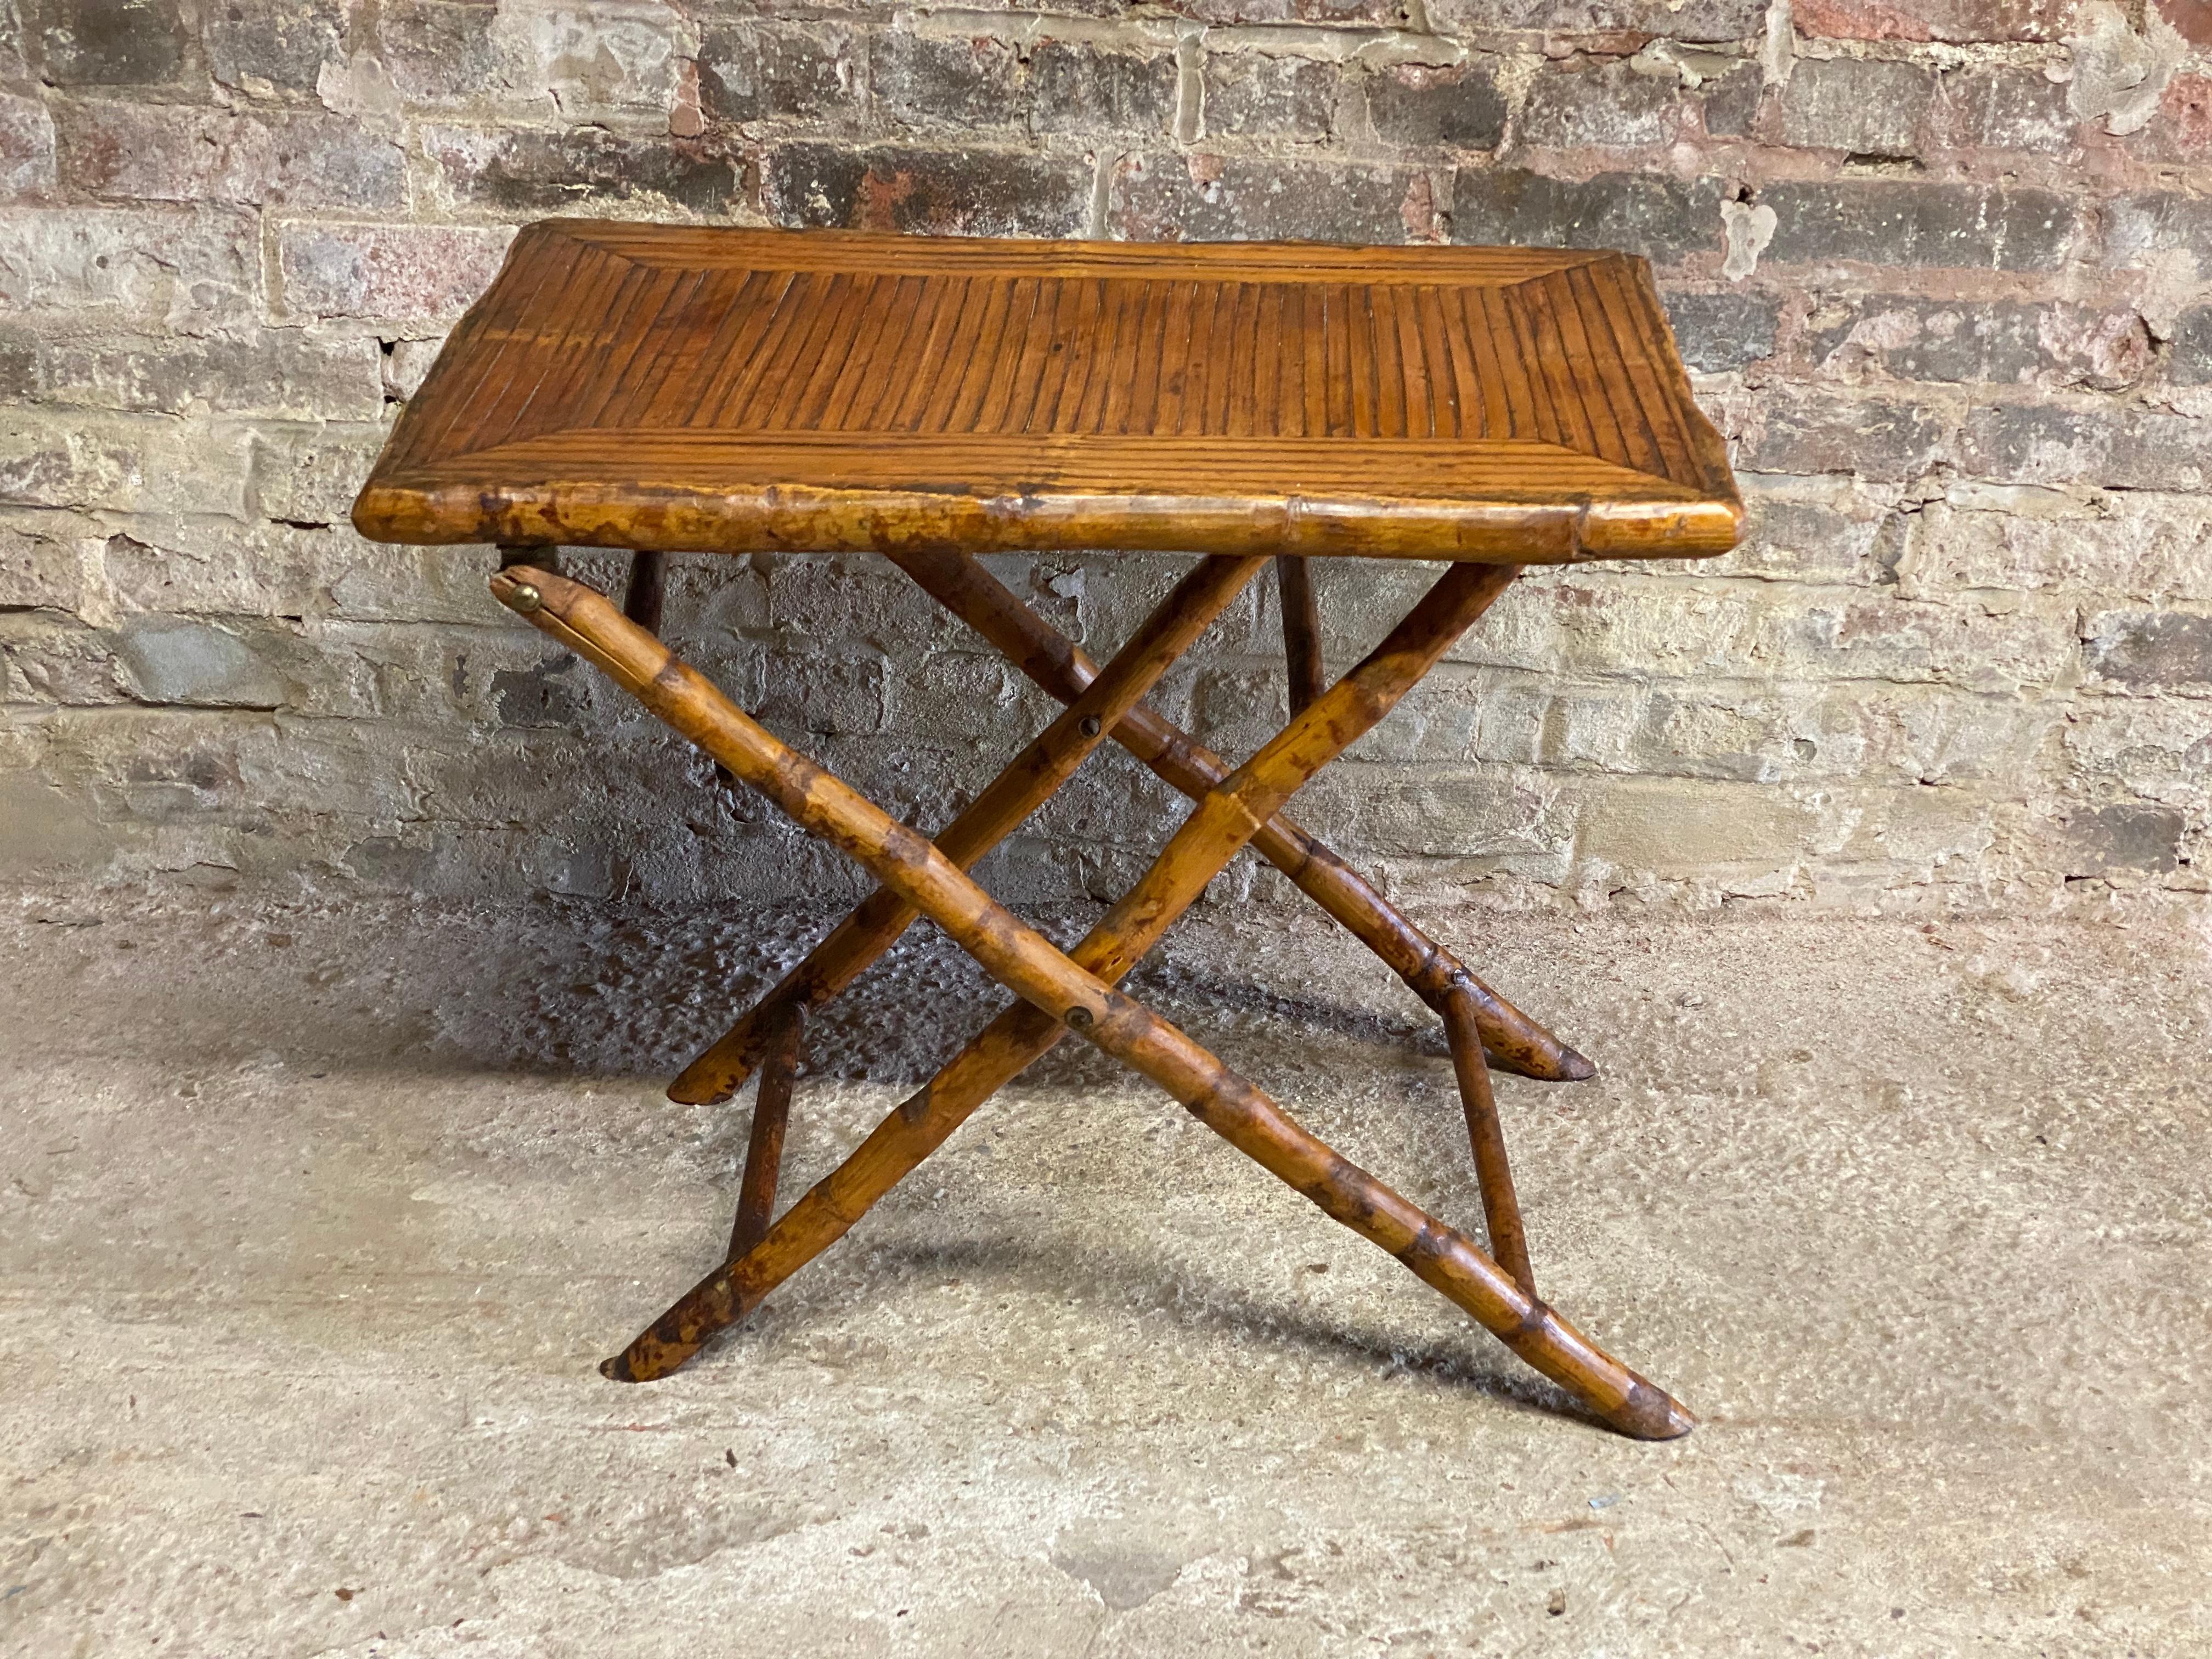 An amazingly versatile Late Victorian Bamboo folding table. The durability and fine decorator quality of old bamboo cannot be matched. Green, environmentally correct and renewable before it was a glimmer of a thought. The top is made of split bamboo